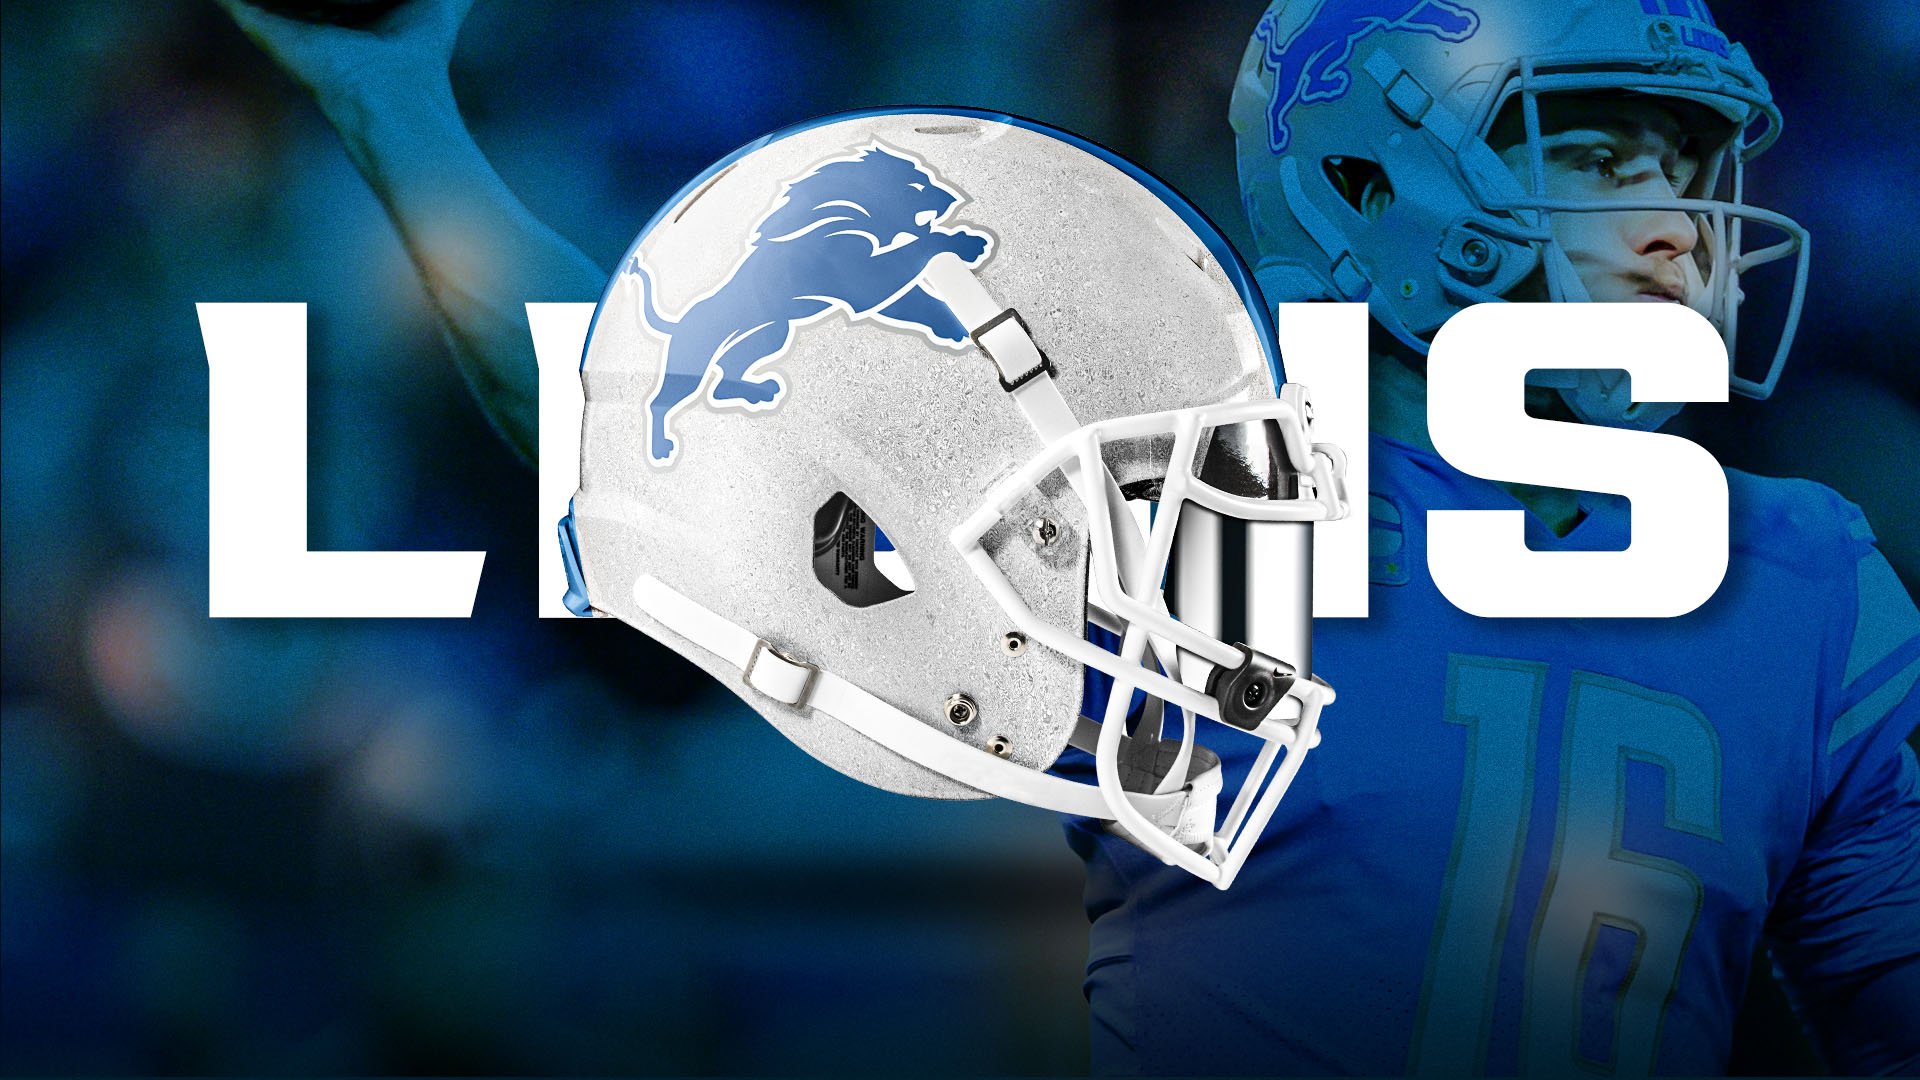 detroit lions football schedule this year